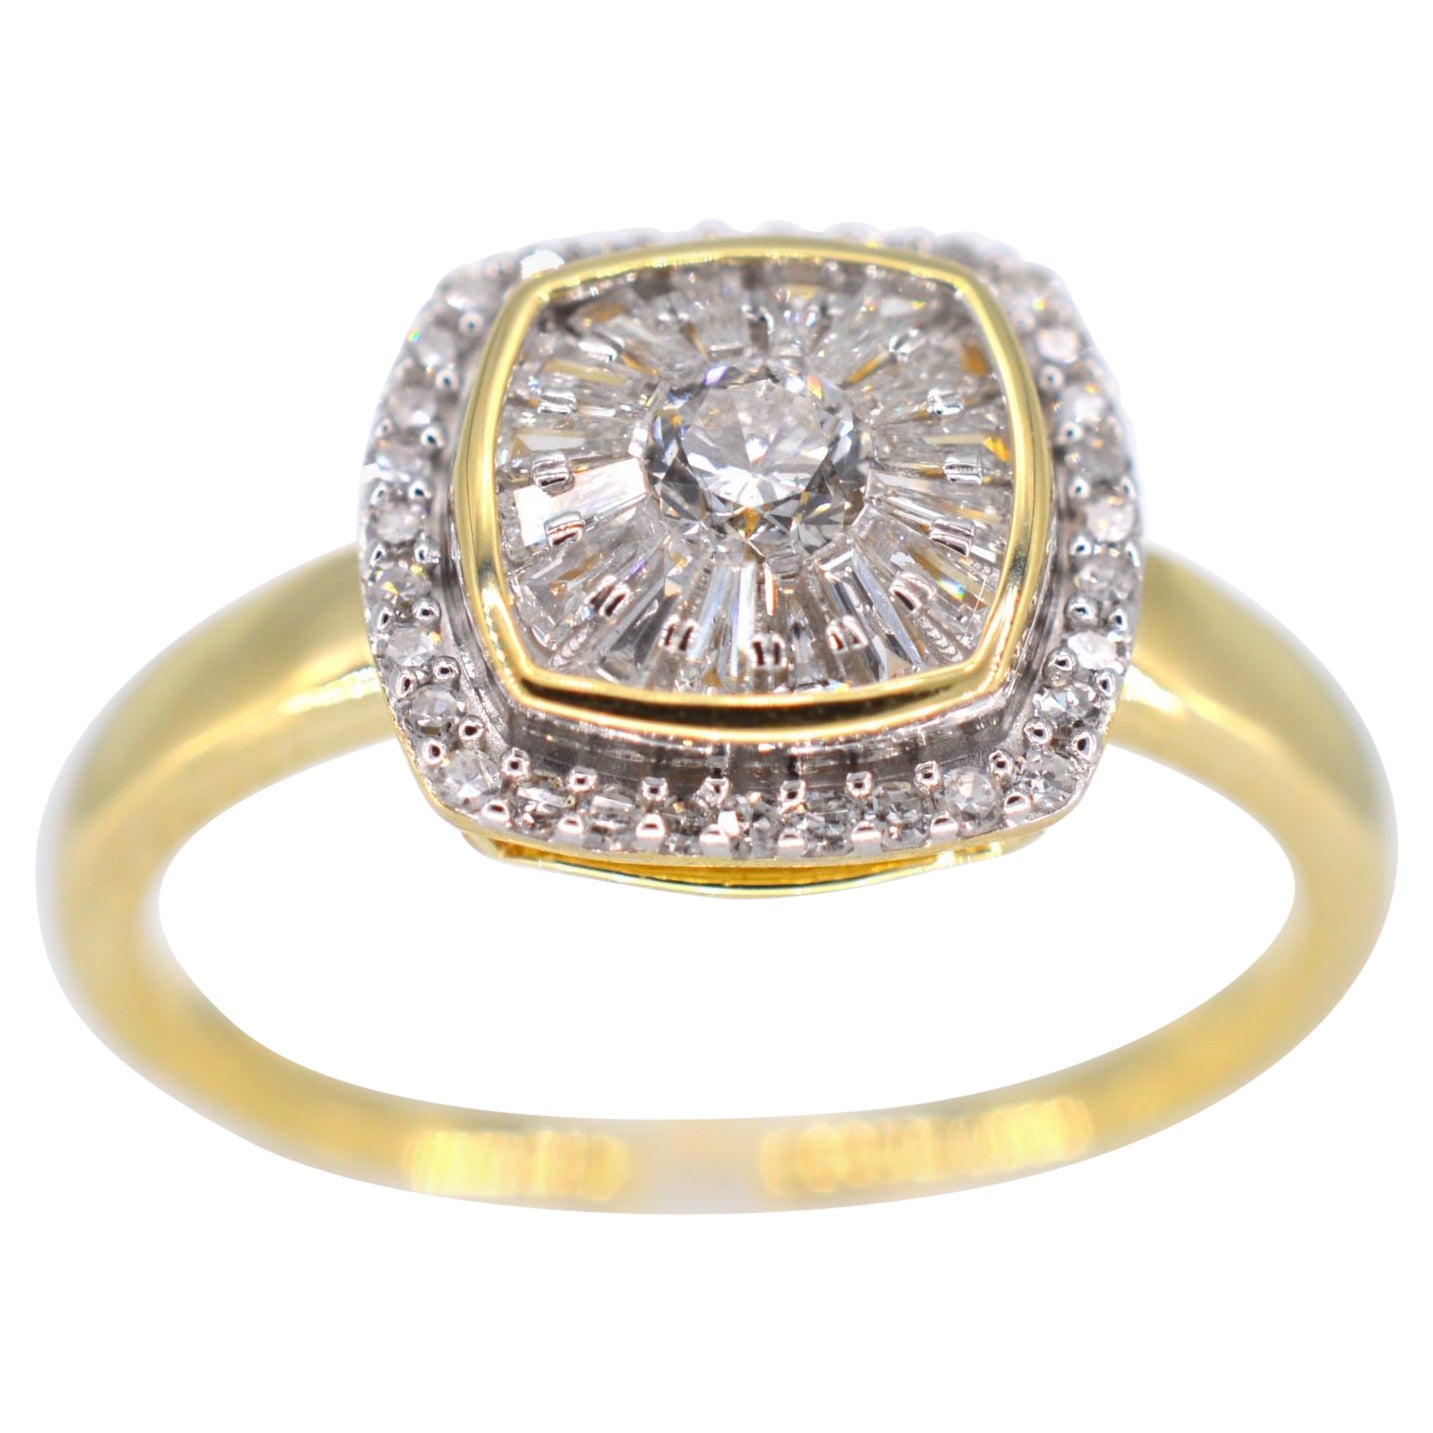 Gold Entourage Ring with Brilliant and Baguette Cut Diamonds